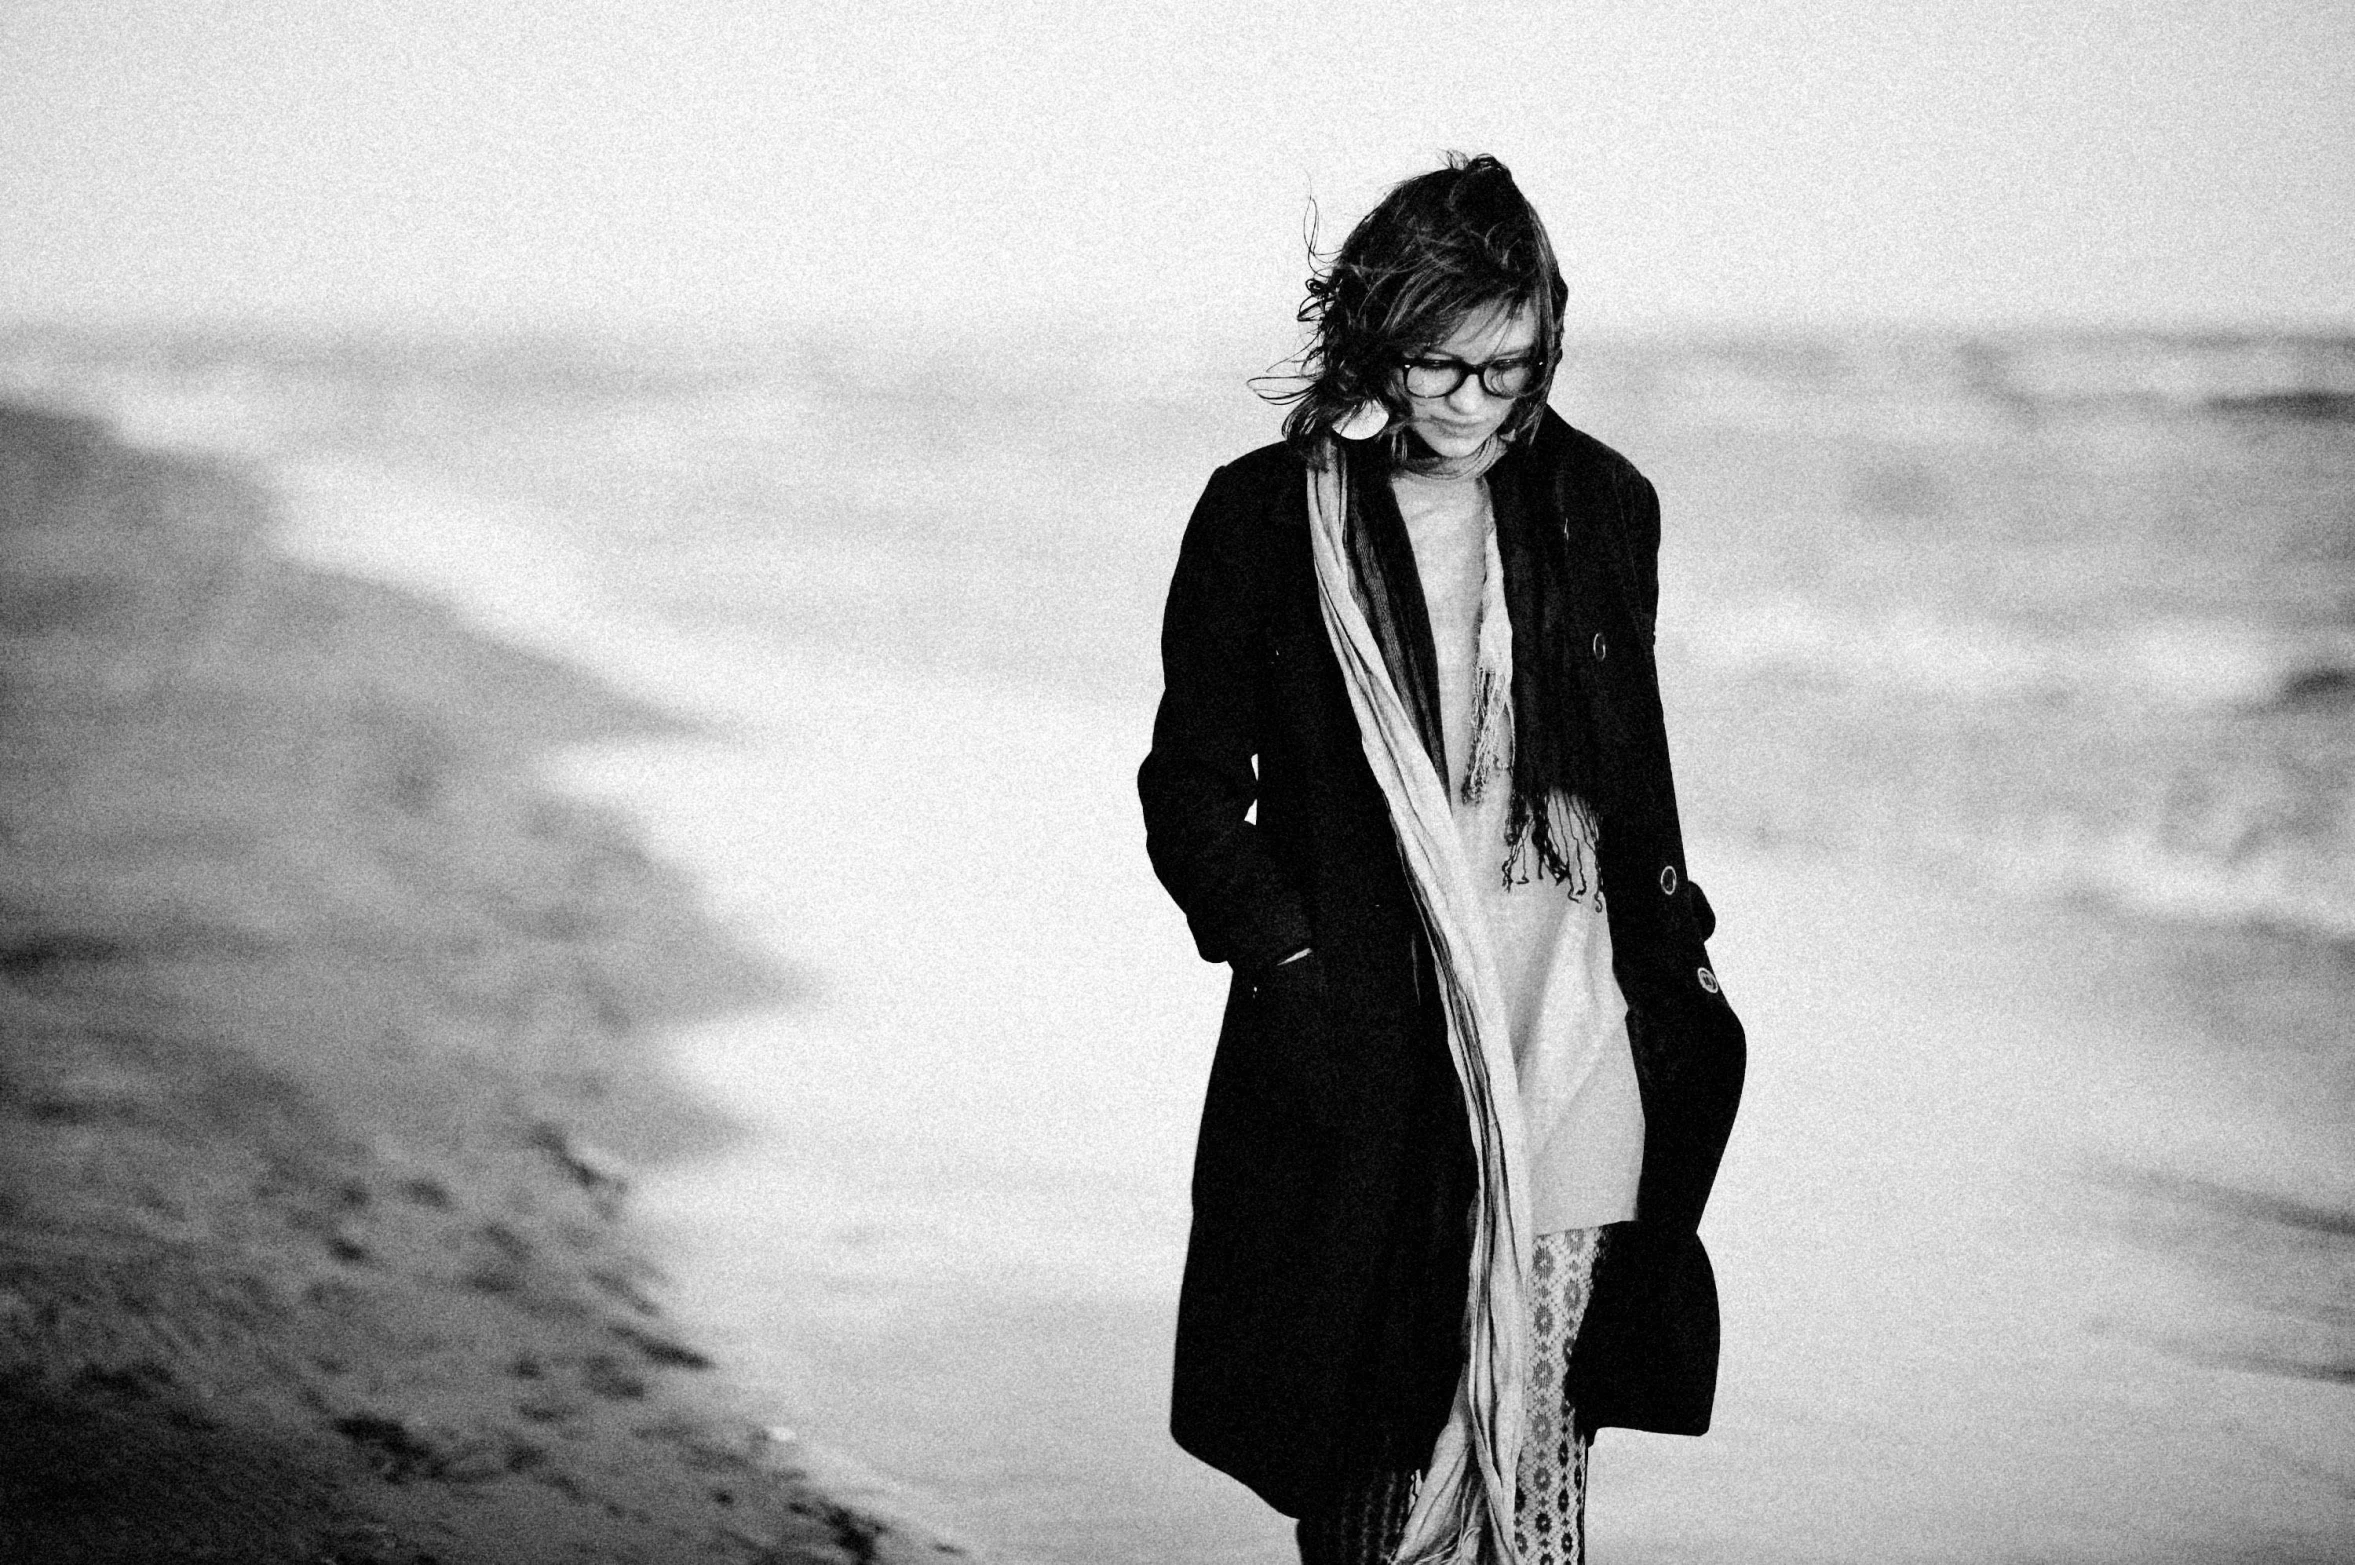 black and white po of girl on the beach